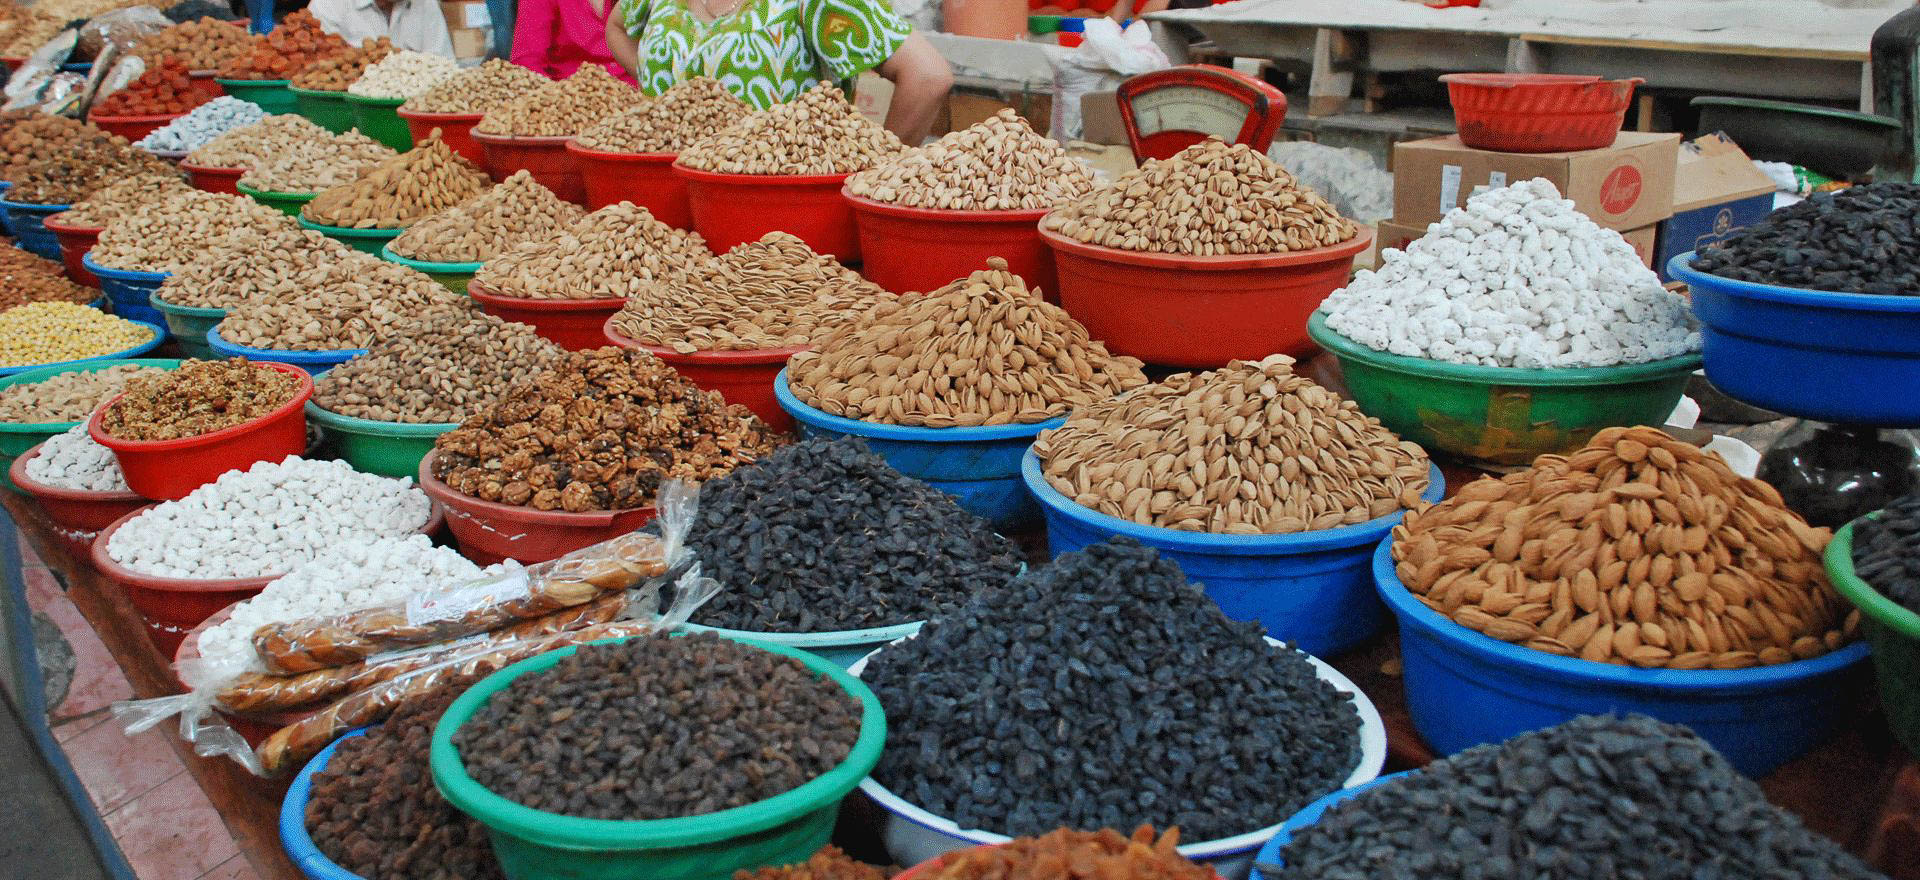 Nuts and fruit on sale in the market - Tajikistan Holidays and Tours